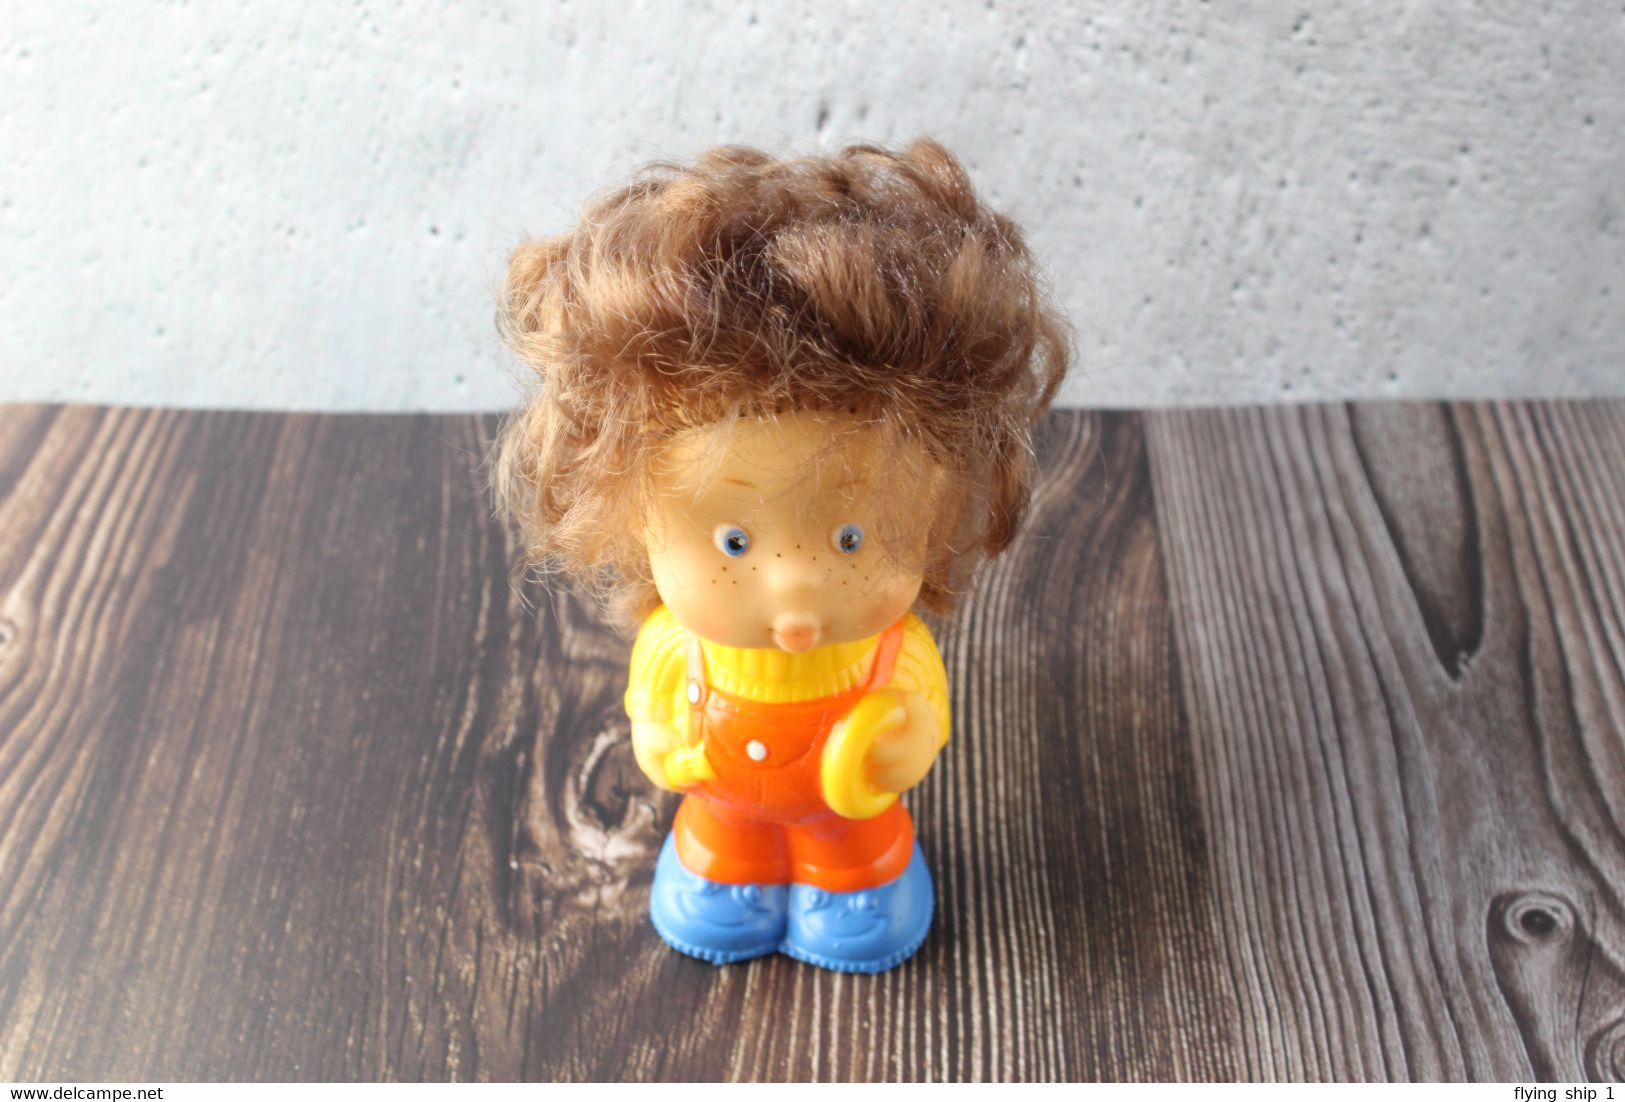 N.O.S. Best Vintage rubber toy USSR 1980s Soviet toy Boy Figurine PONCHIK Brown hair from Neznaika. Baby Doll